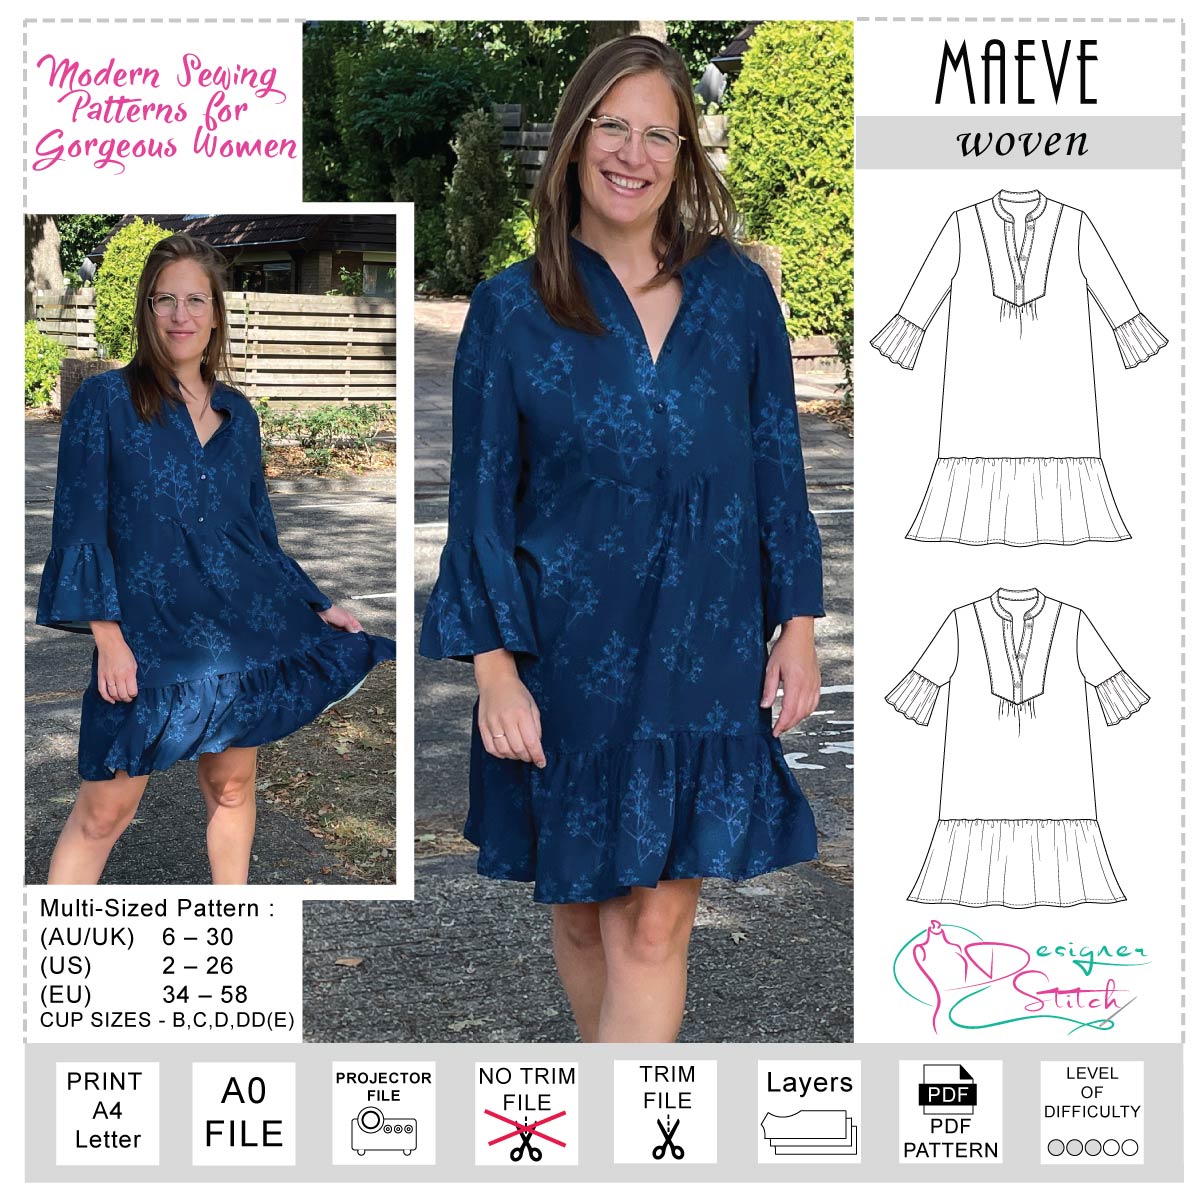 The Maeve Nightgown Sewing Pattern, by Seamwork